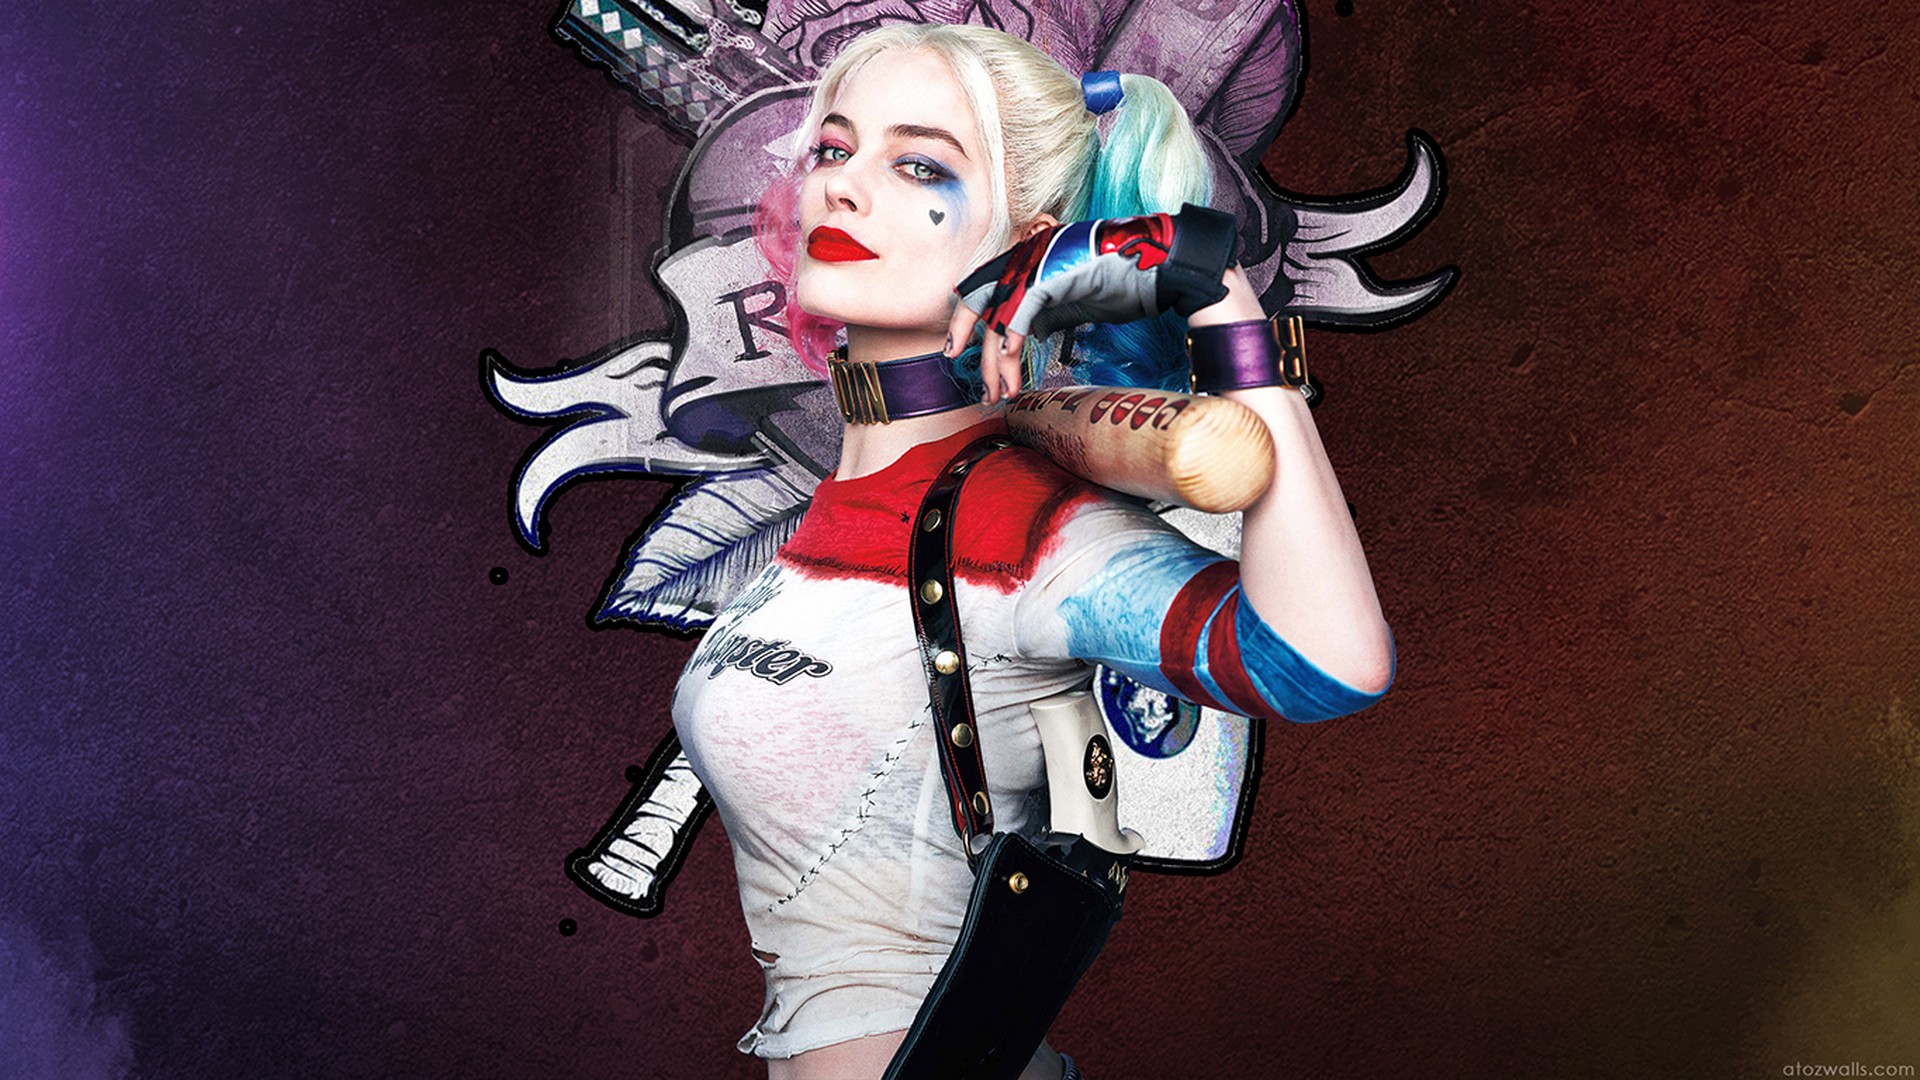 Desktop Wallpaper Harley Quinn with image resolution 1920x1080 pixel. You can use this wallpaper as background for your desktop Computer Screensavers, Android or iPhone smartphones